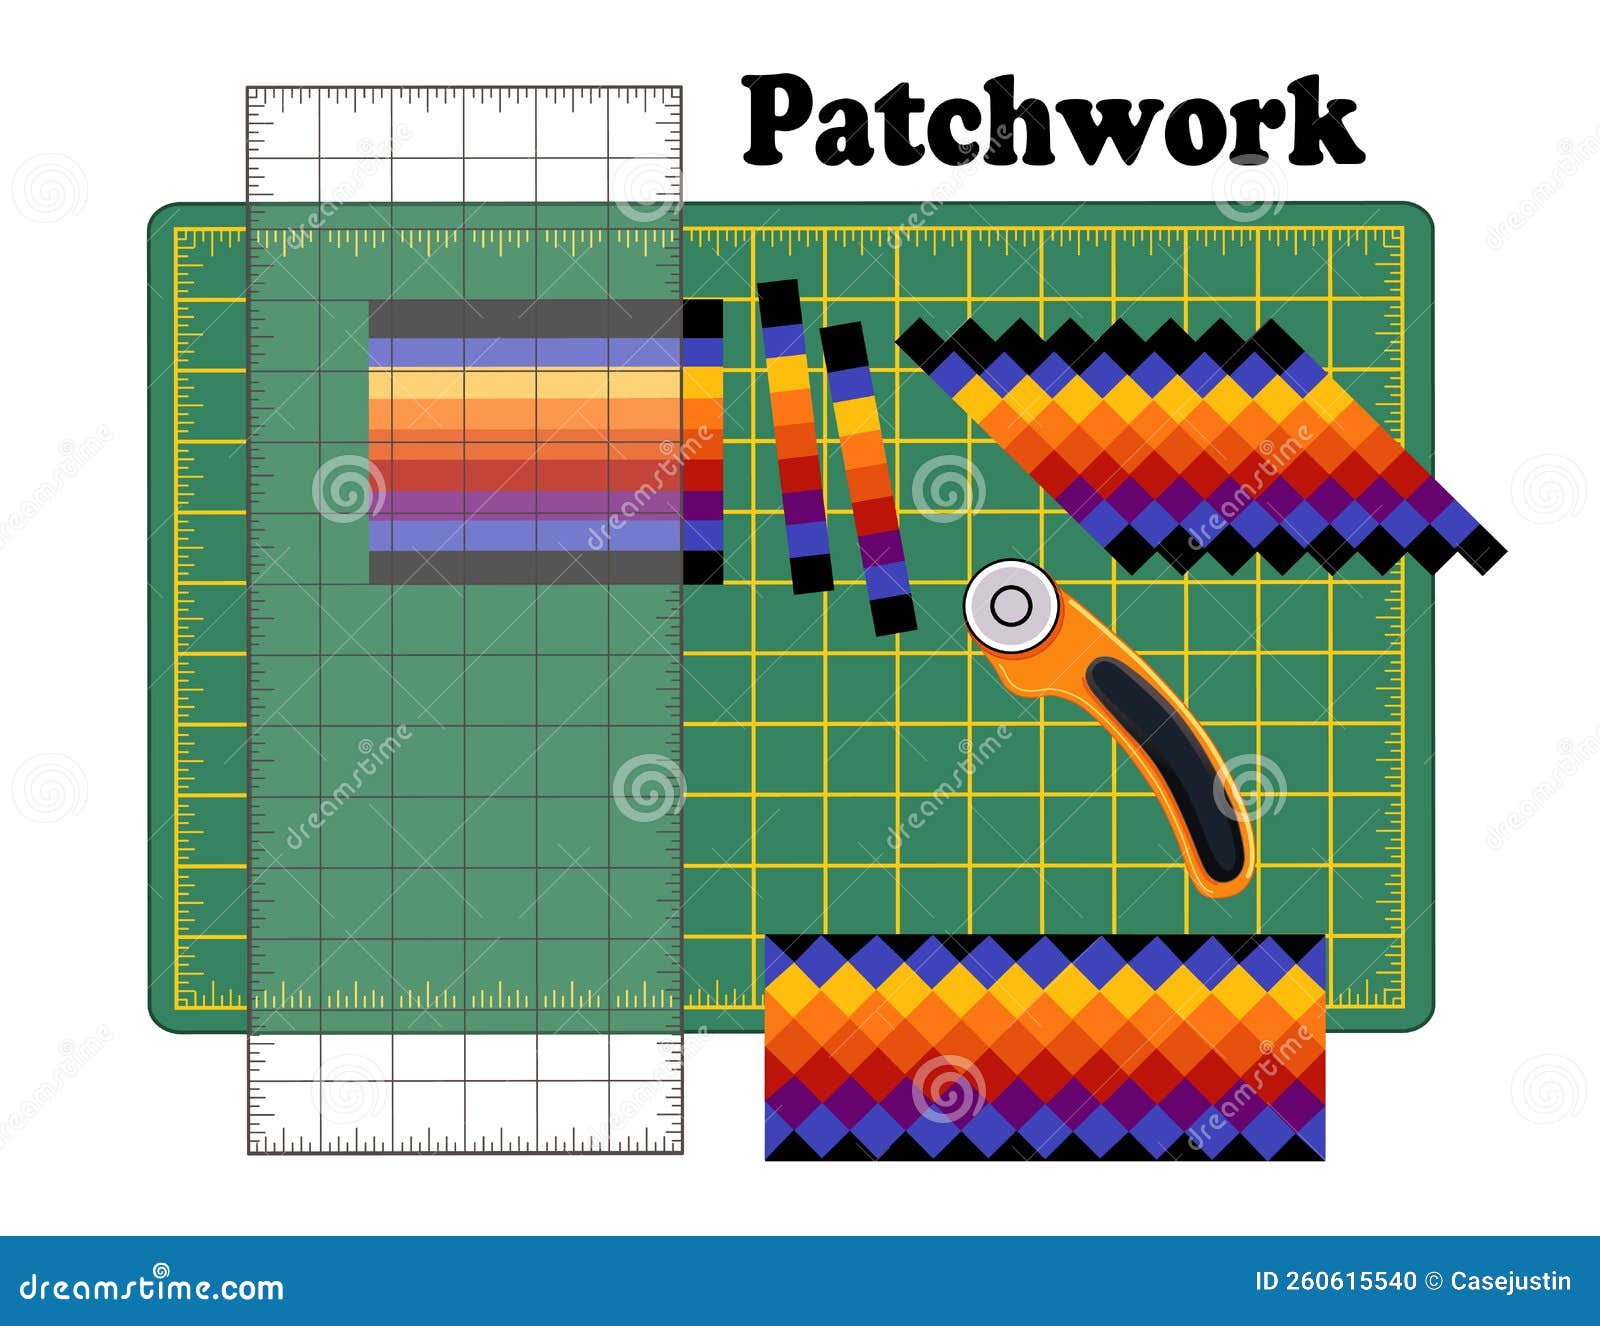 Quilting, Patchwork, Sewing Stickers on Cutting Mat Stock Vector